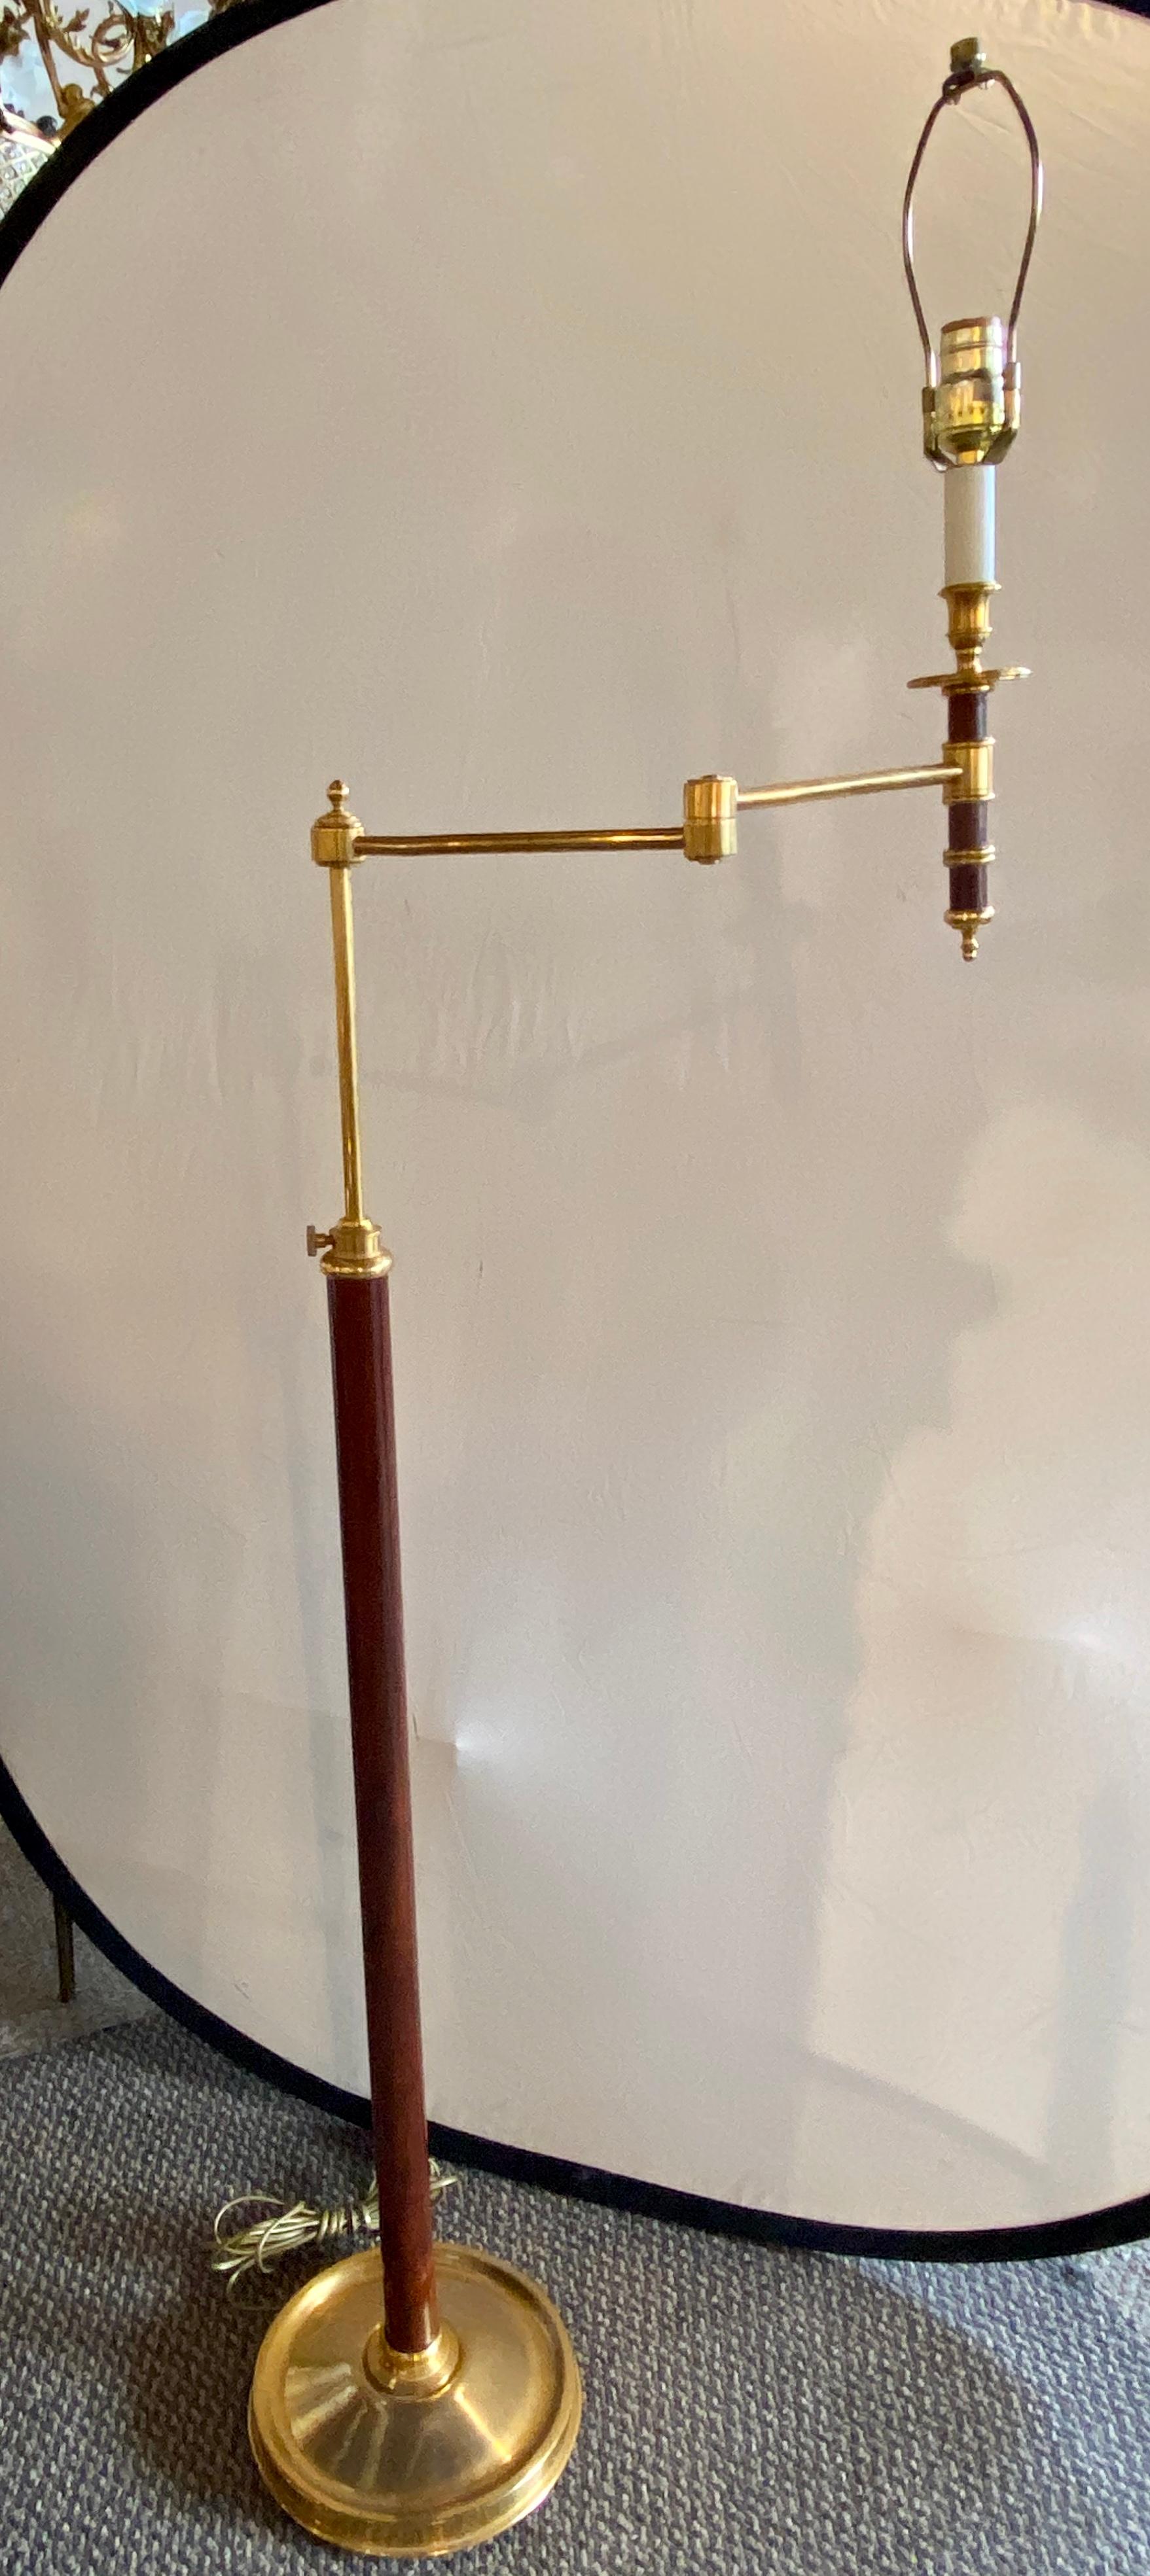 Decorator floor or standing tall lamp. Leather pole with brass custom shade. This finely crafted standing floor lamp is not signed by certainly seems to be by a known designer. The brass weighted circular base supporting a long hand stitched leather